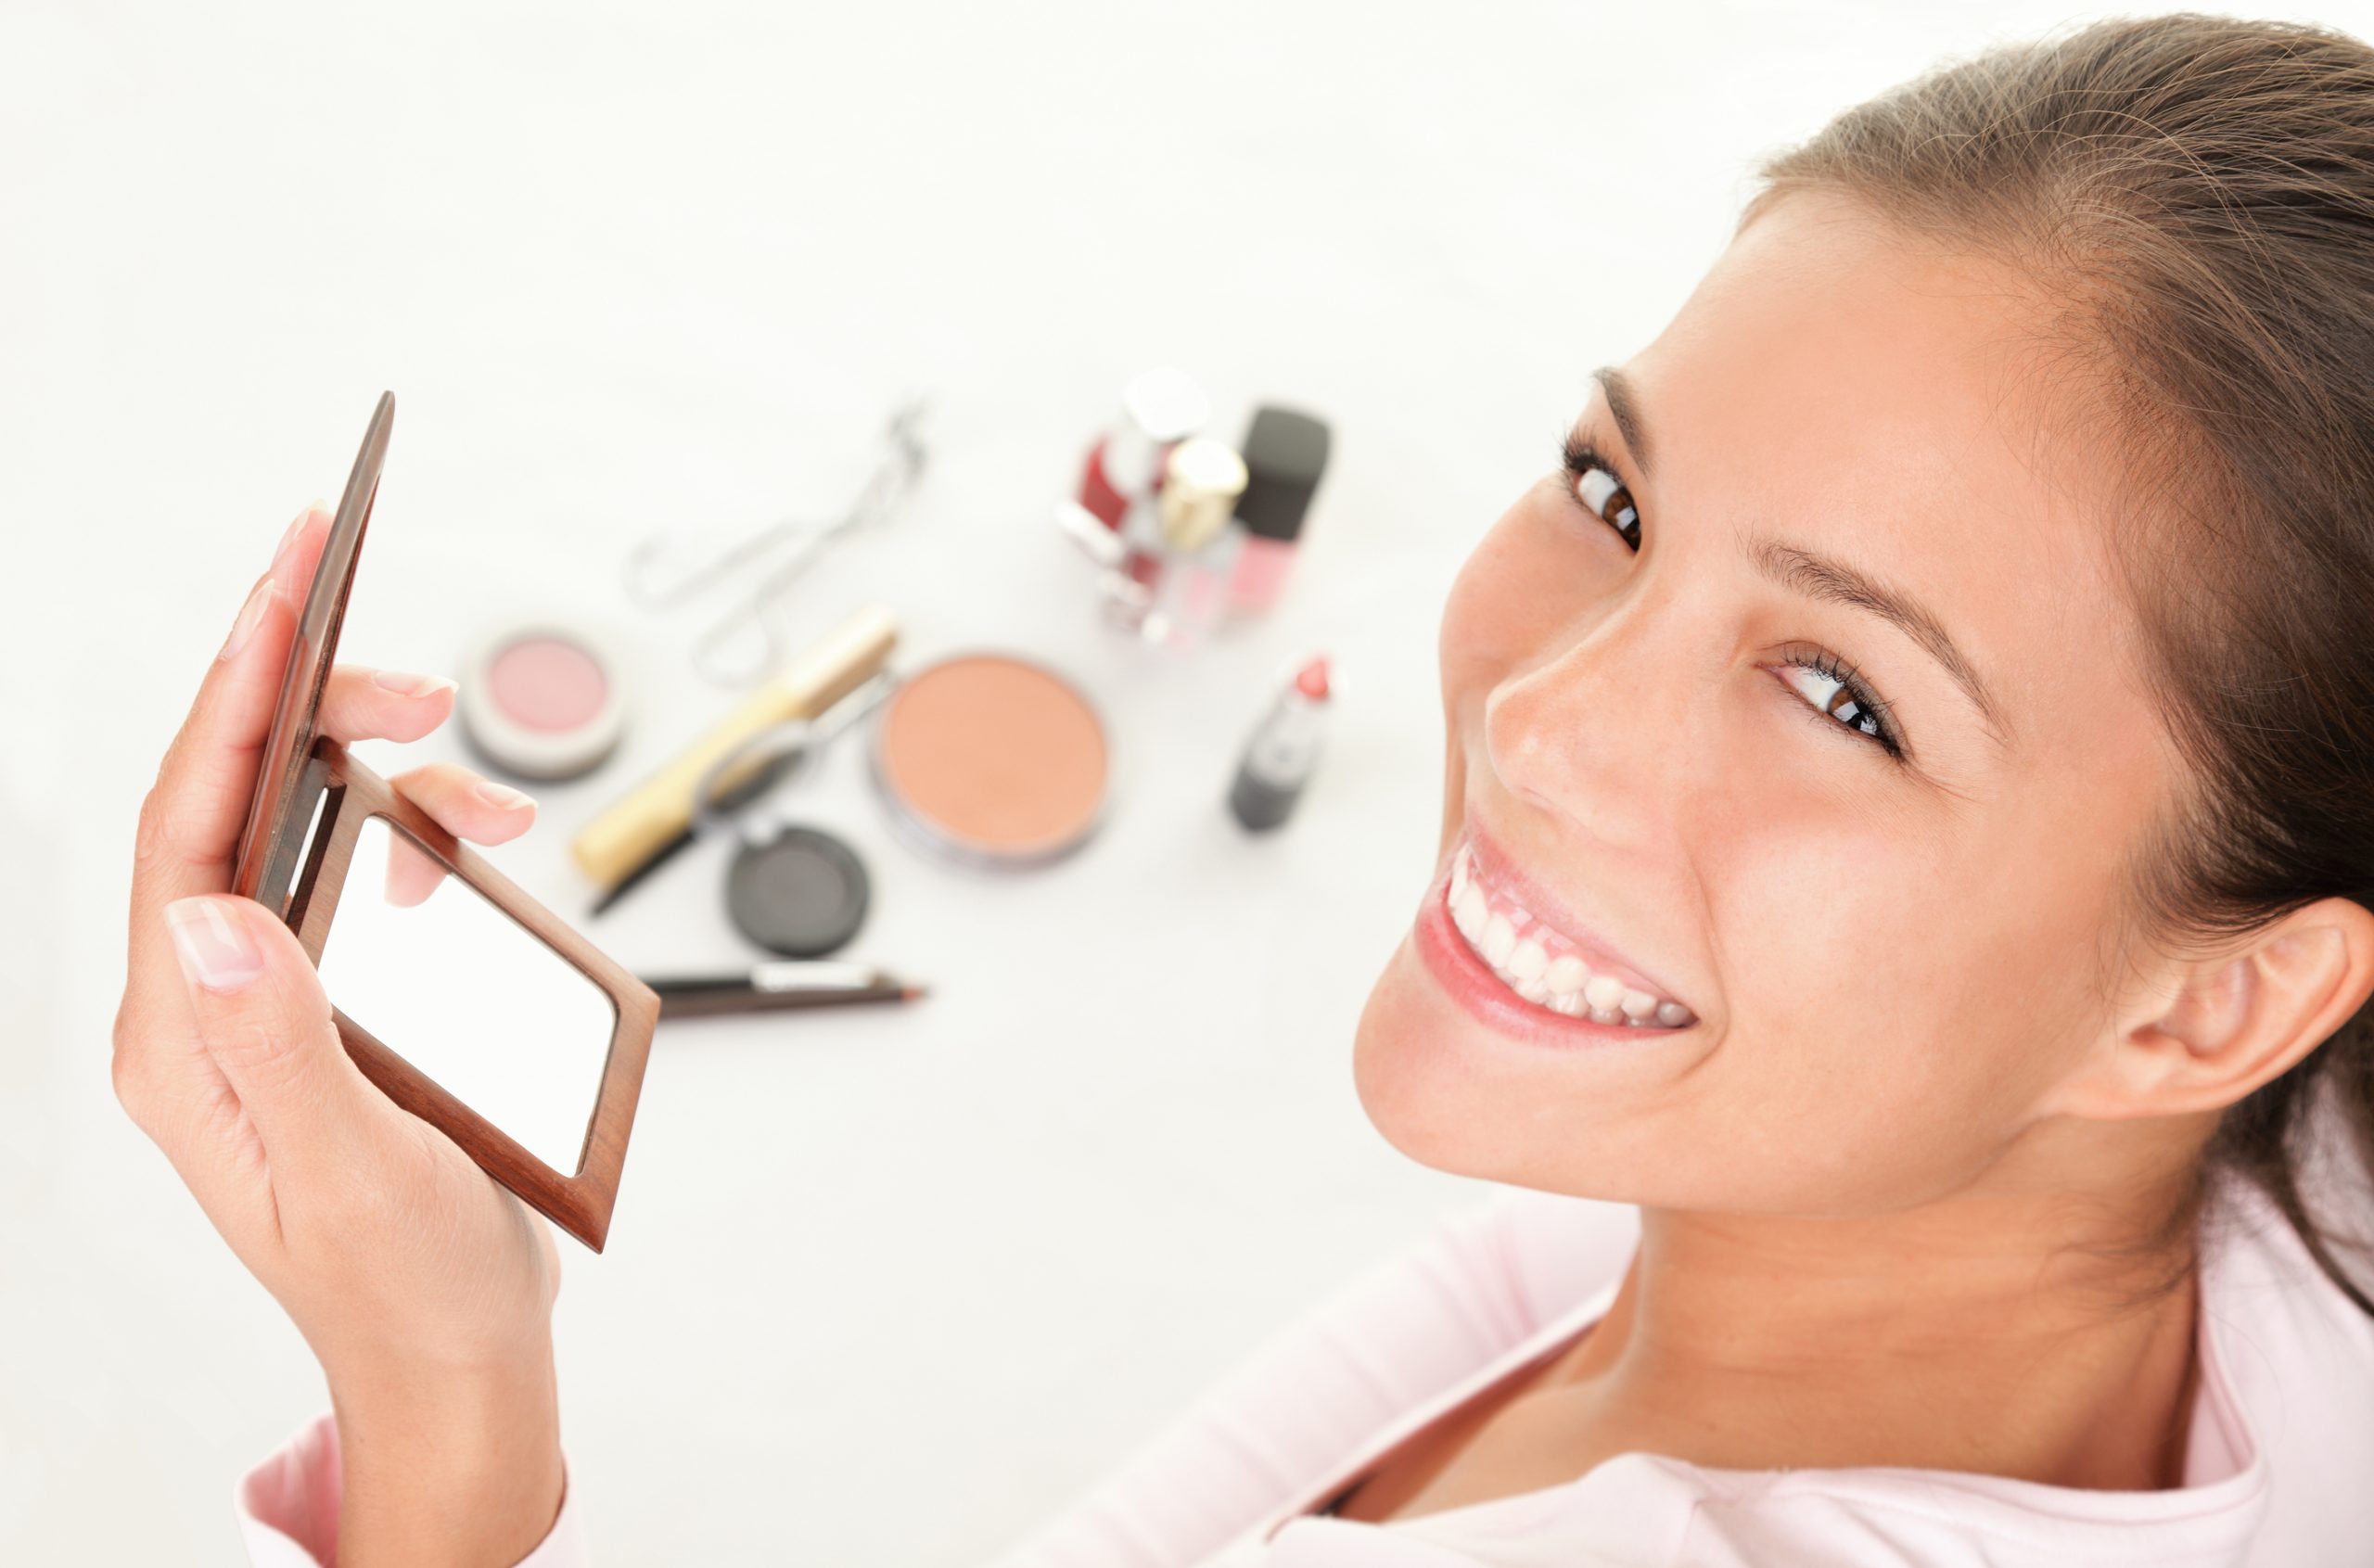 Addictive beauty product rewards programs on mobile apps